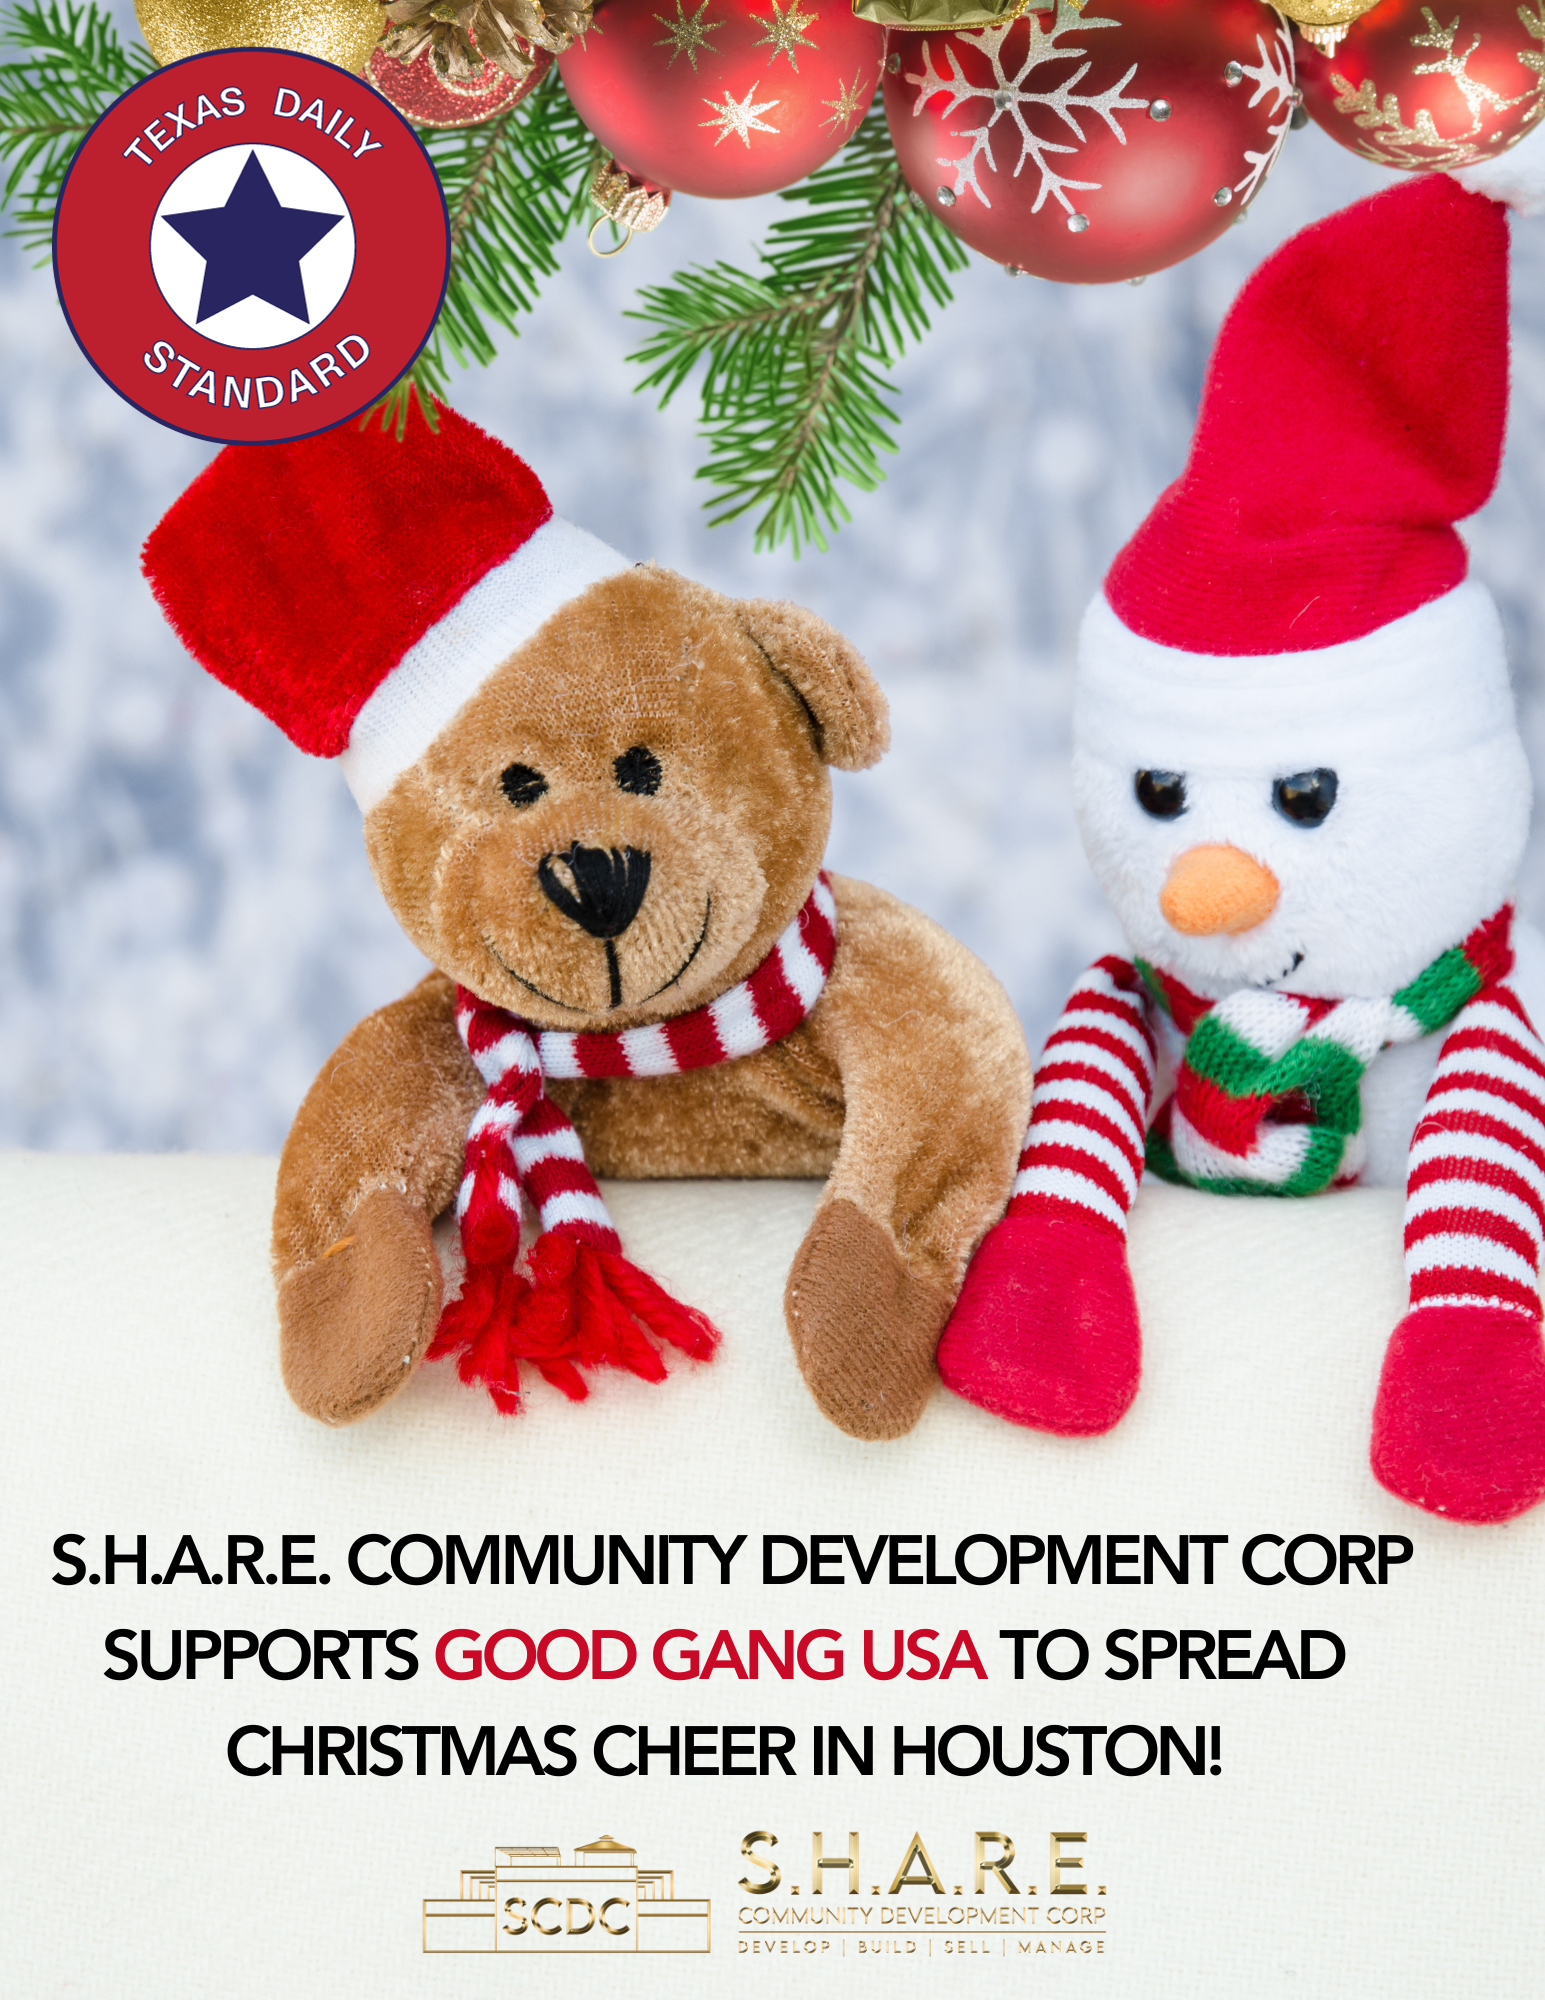 S.H.A.R.E. Community Development Corp Supports Good Gang USA to Spread Christmas Cheer in Houston